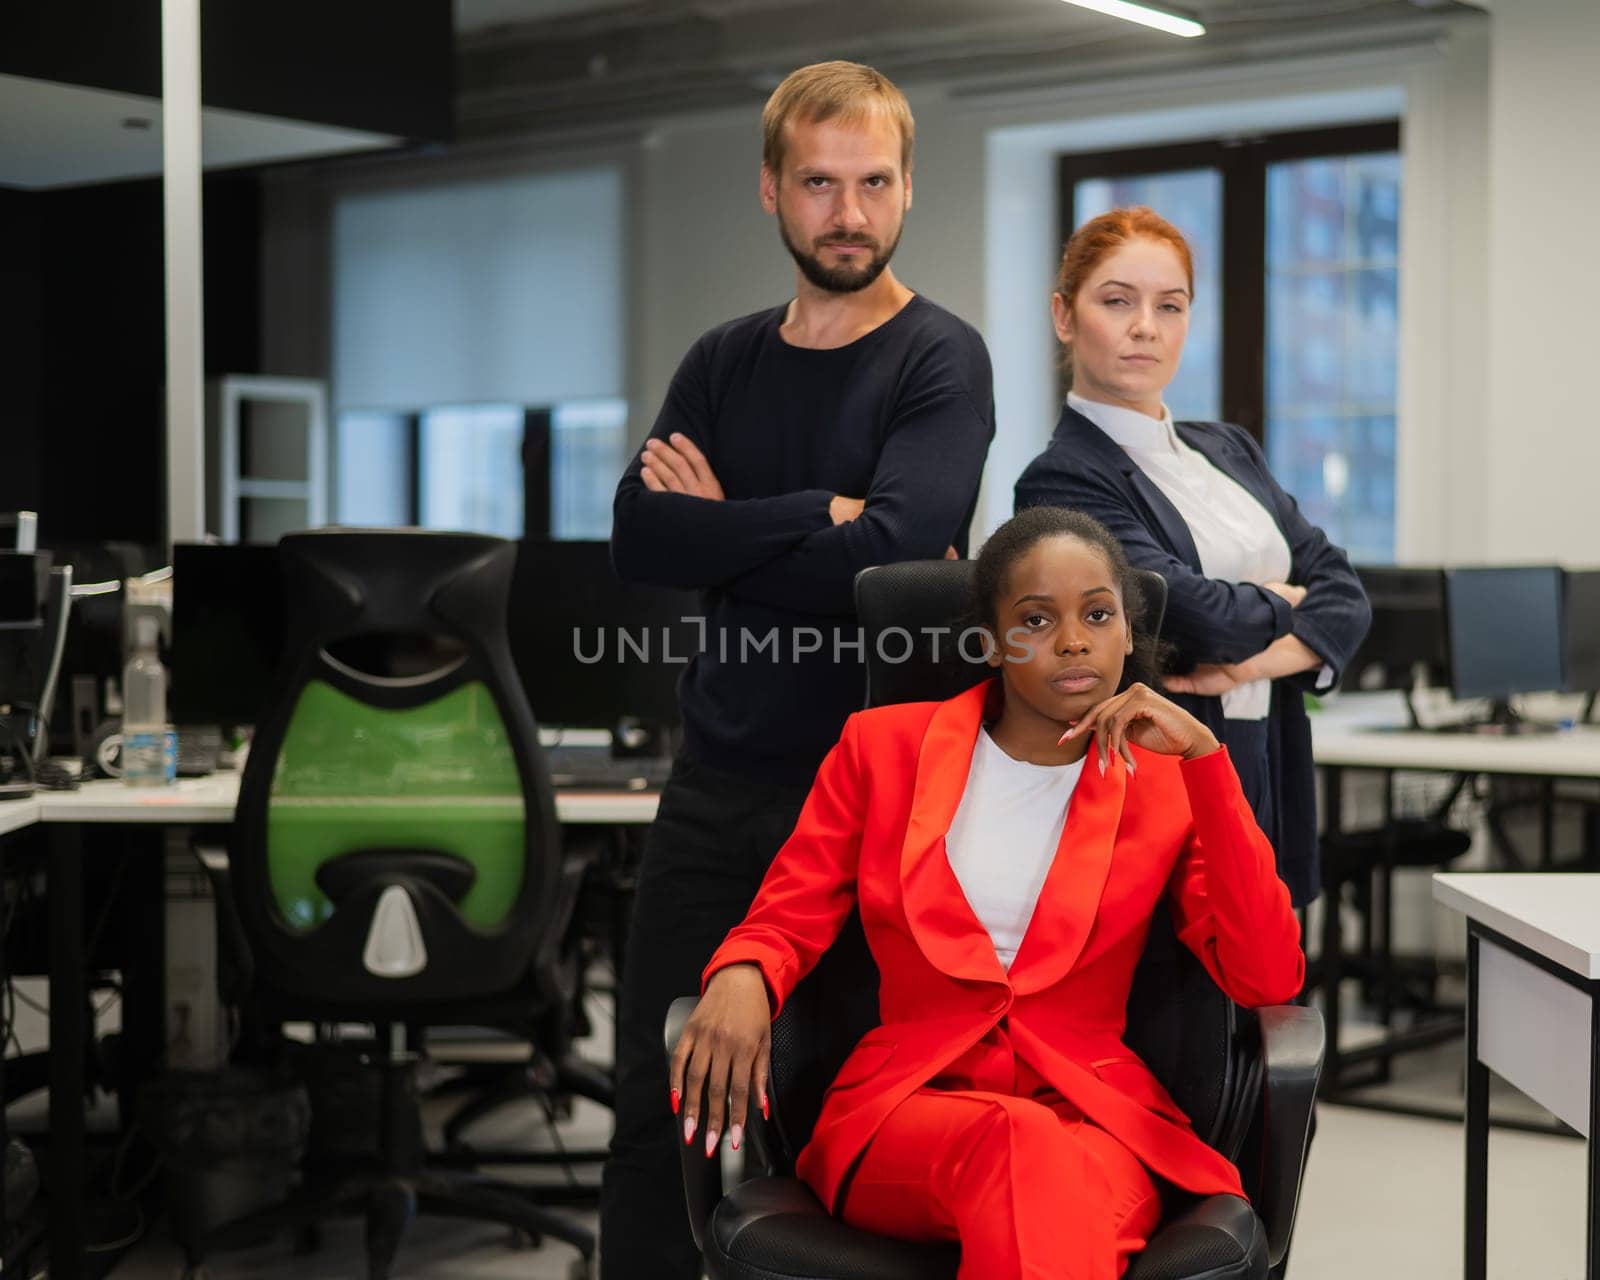 Caucasian red-haired woman, bearded Caucasian man stand behind a seated African American young woman in the office